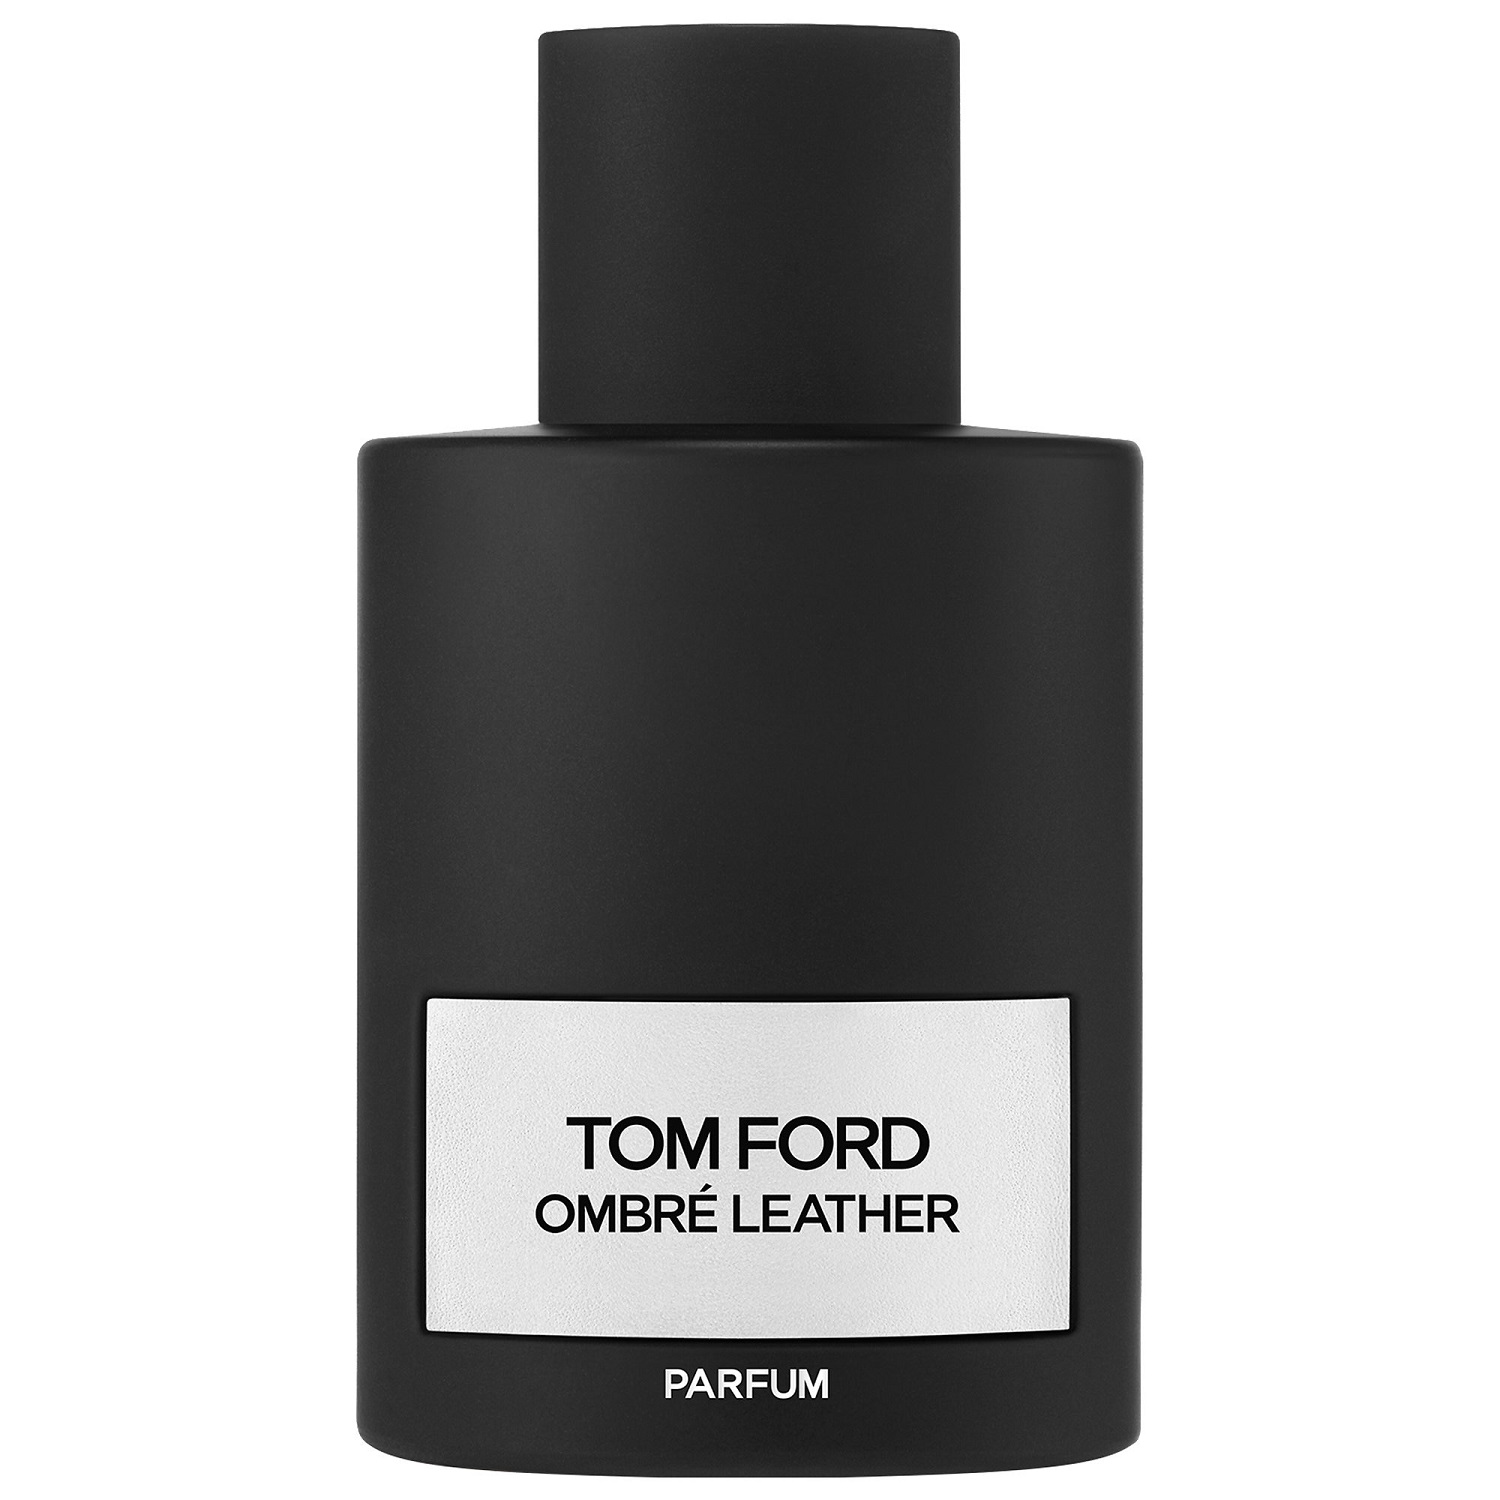 

Tom Ford - Ombre Leather Parfum (5мл)